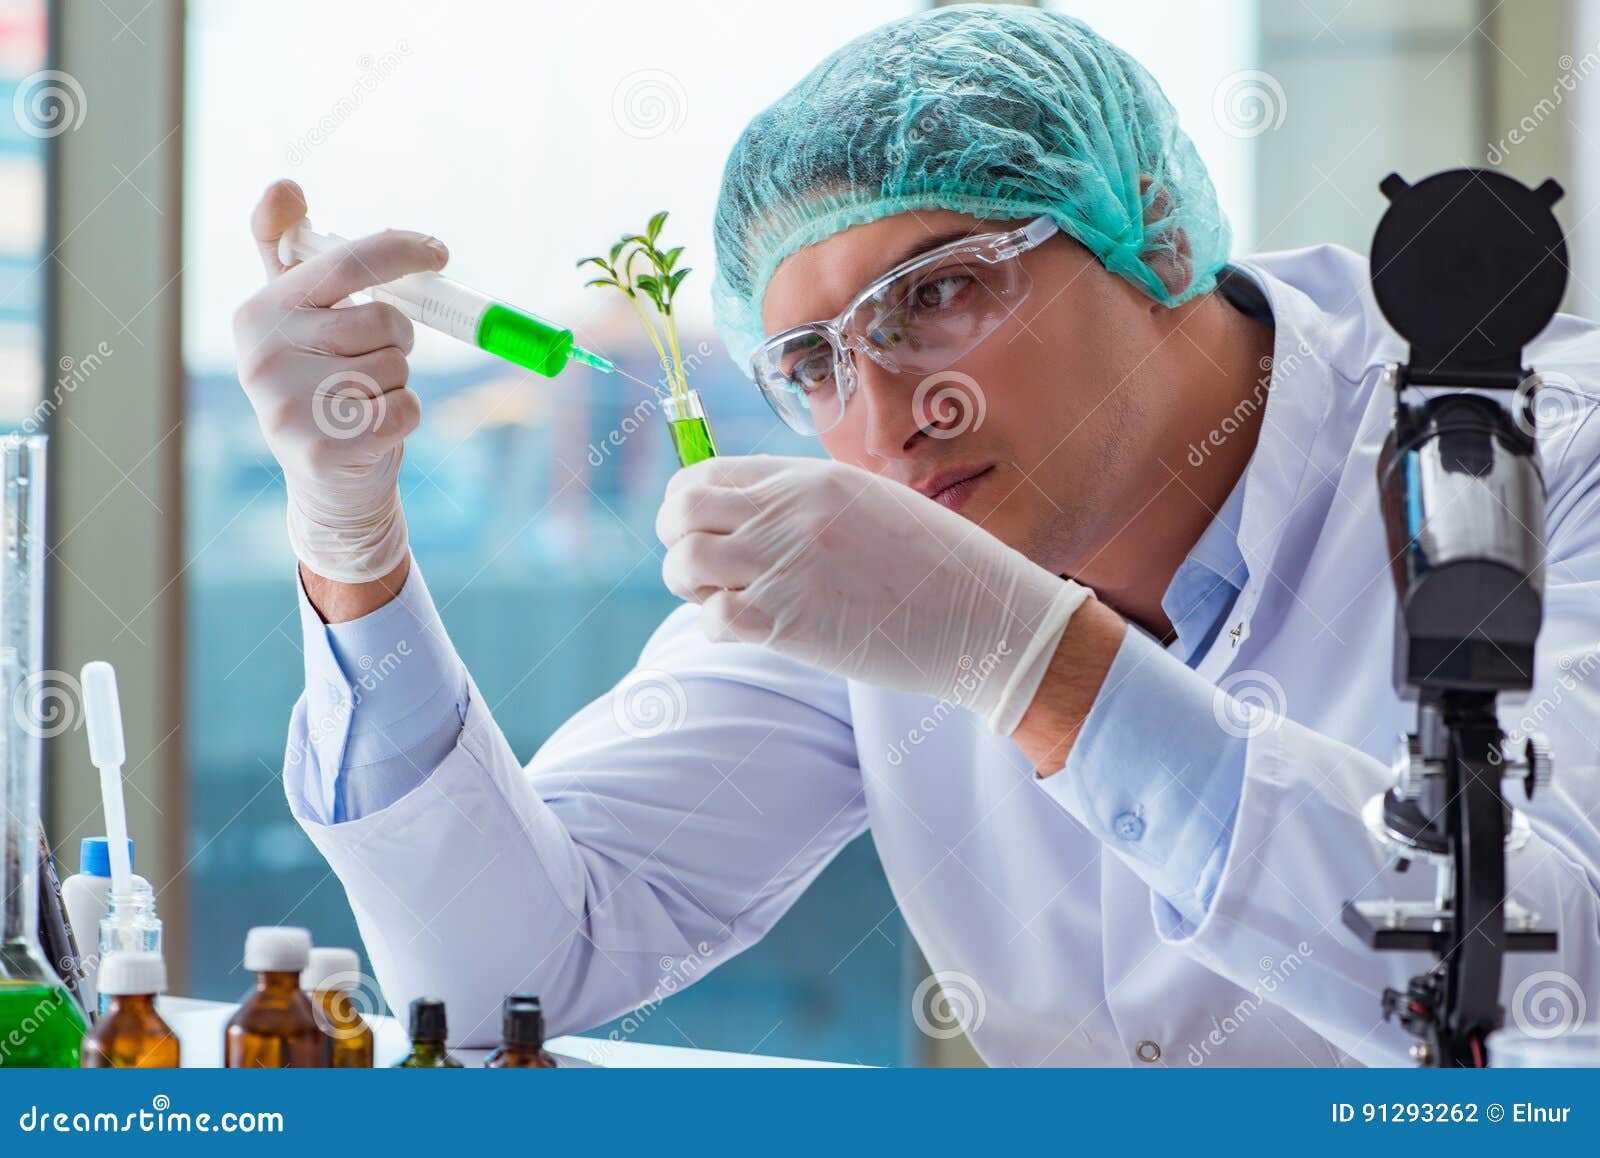 The Biotechnology Scientist Working in the Lab Stock Photo Image of